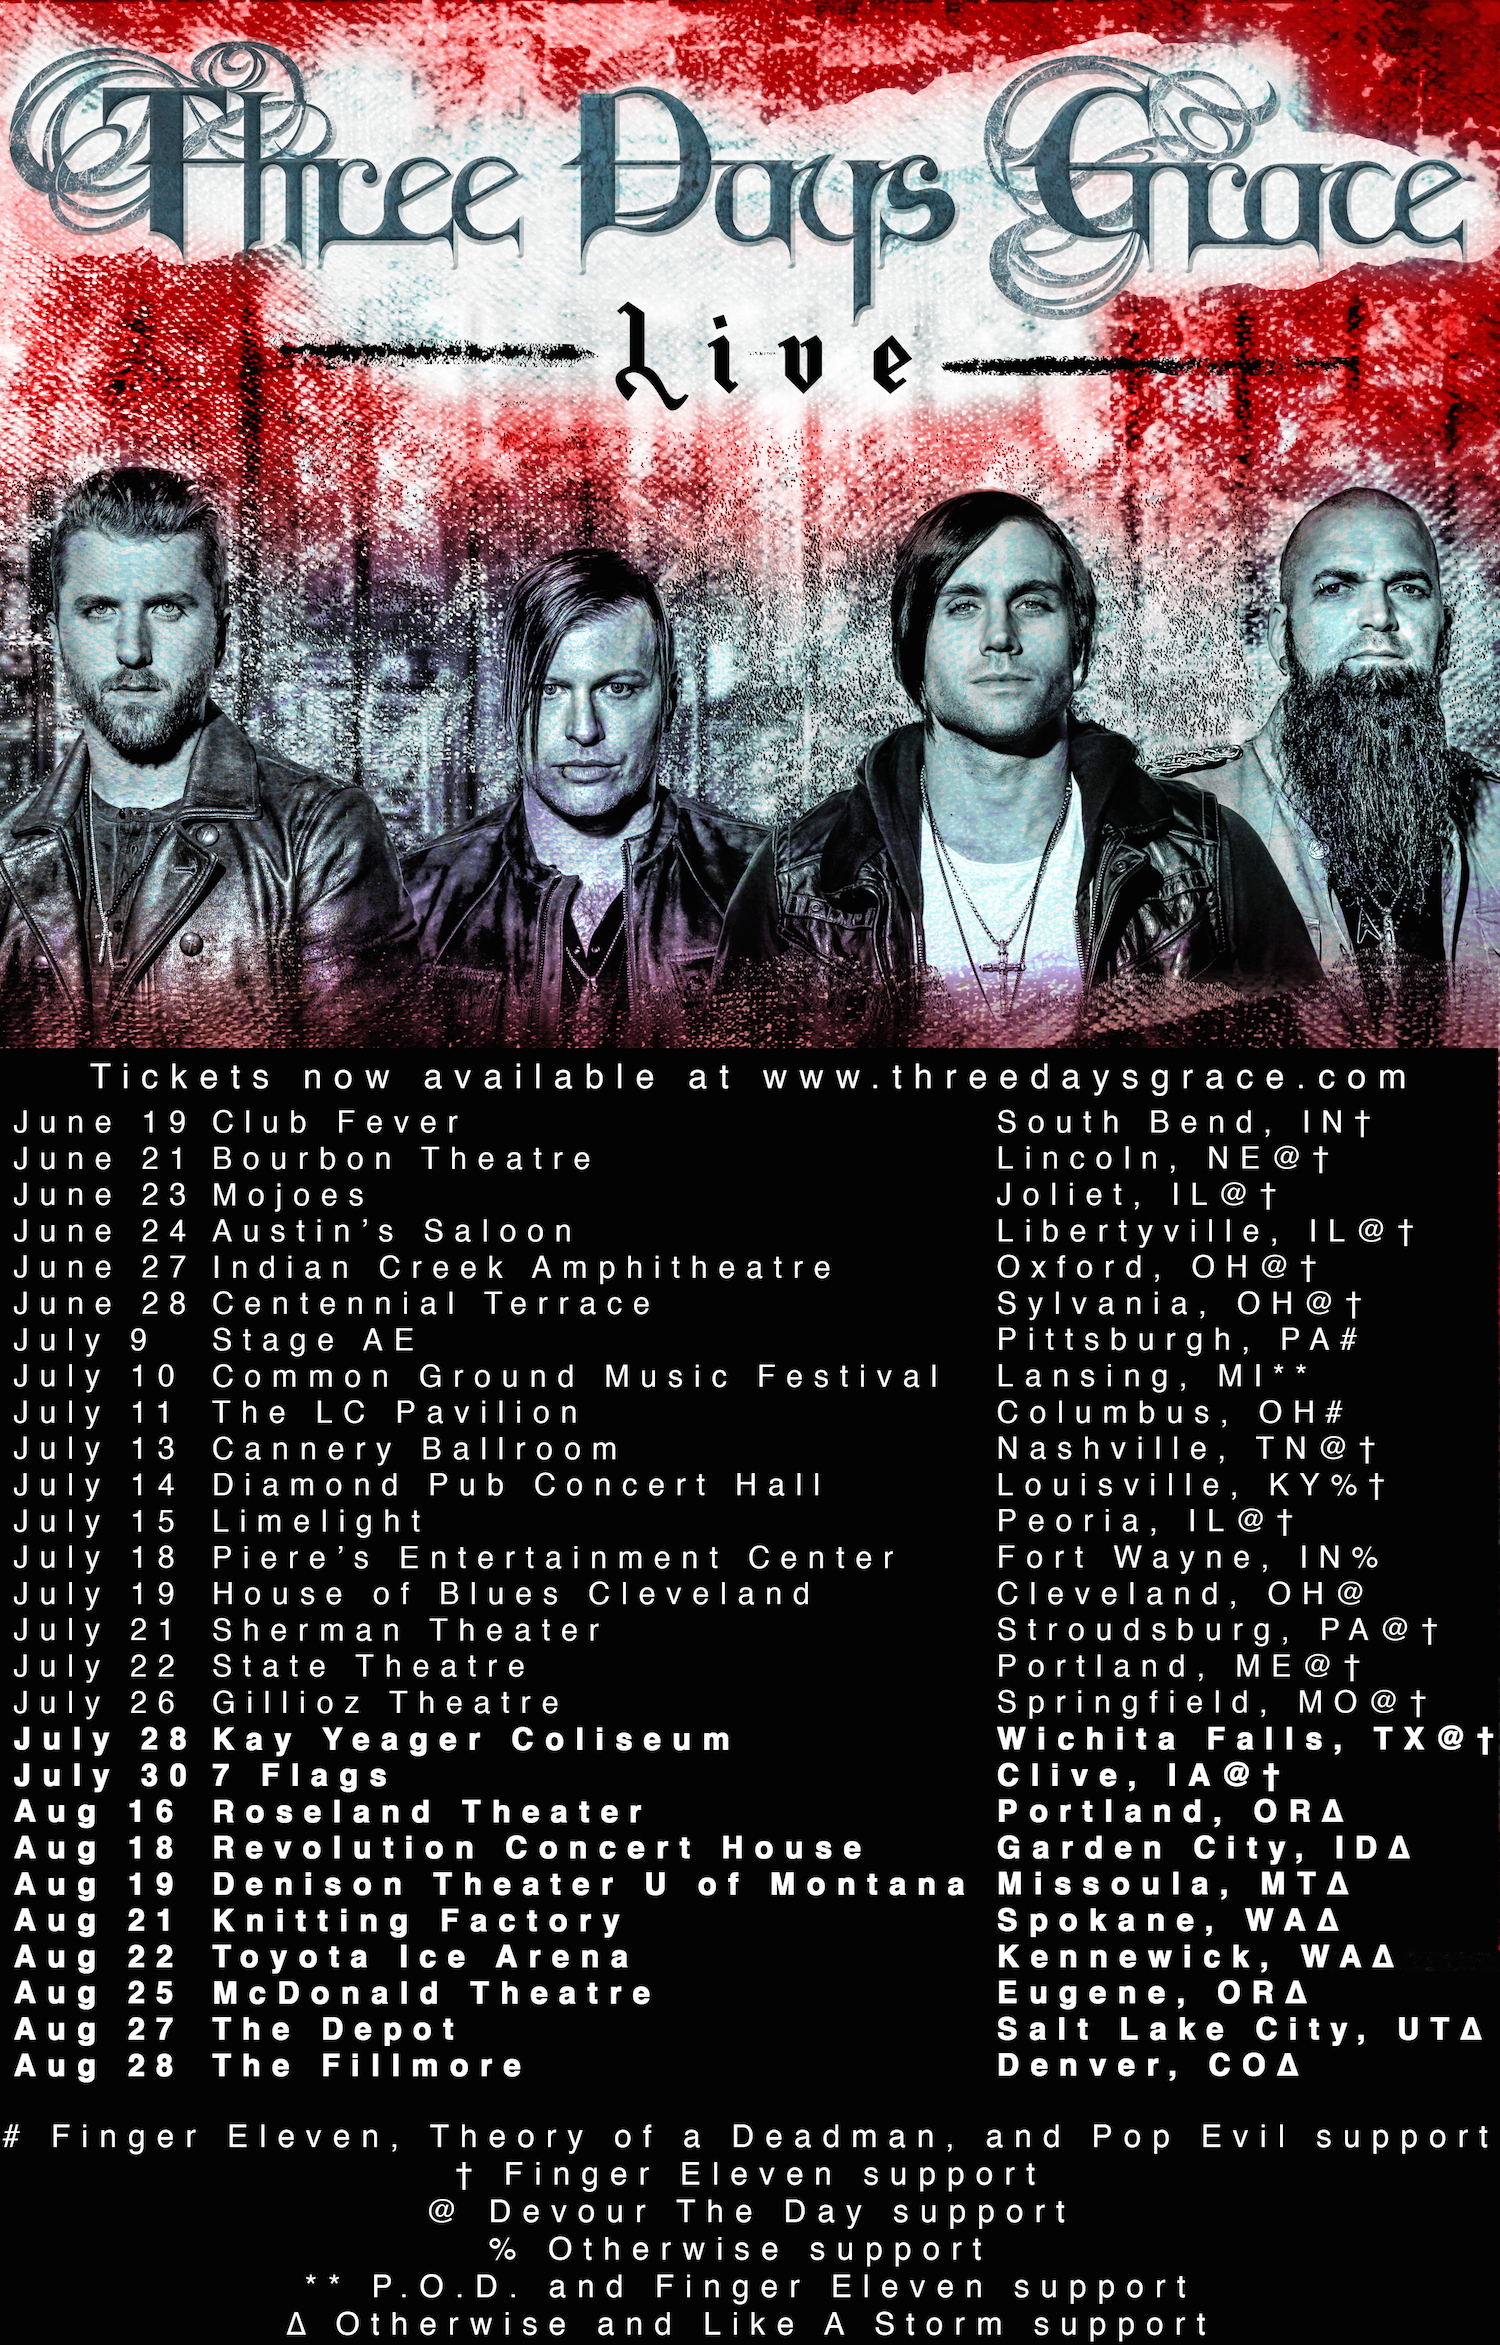 THREE DAYS GRACE ANNOUNCE ADDITIONAL SUMMER U.S. SHOWS